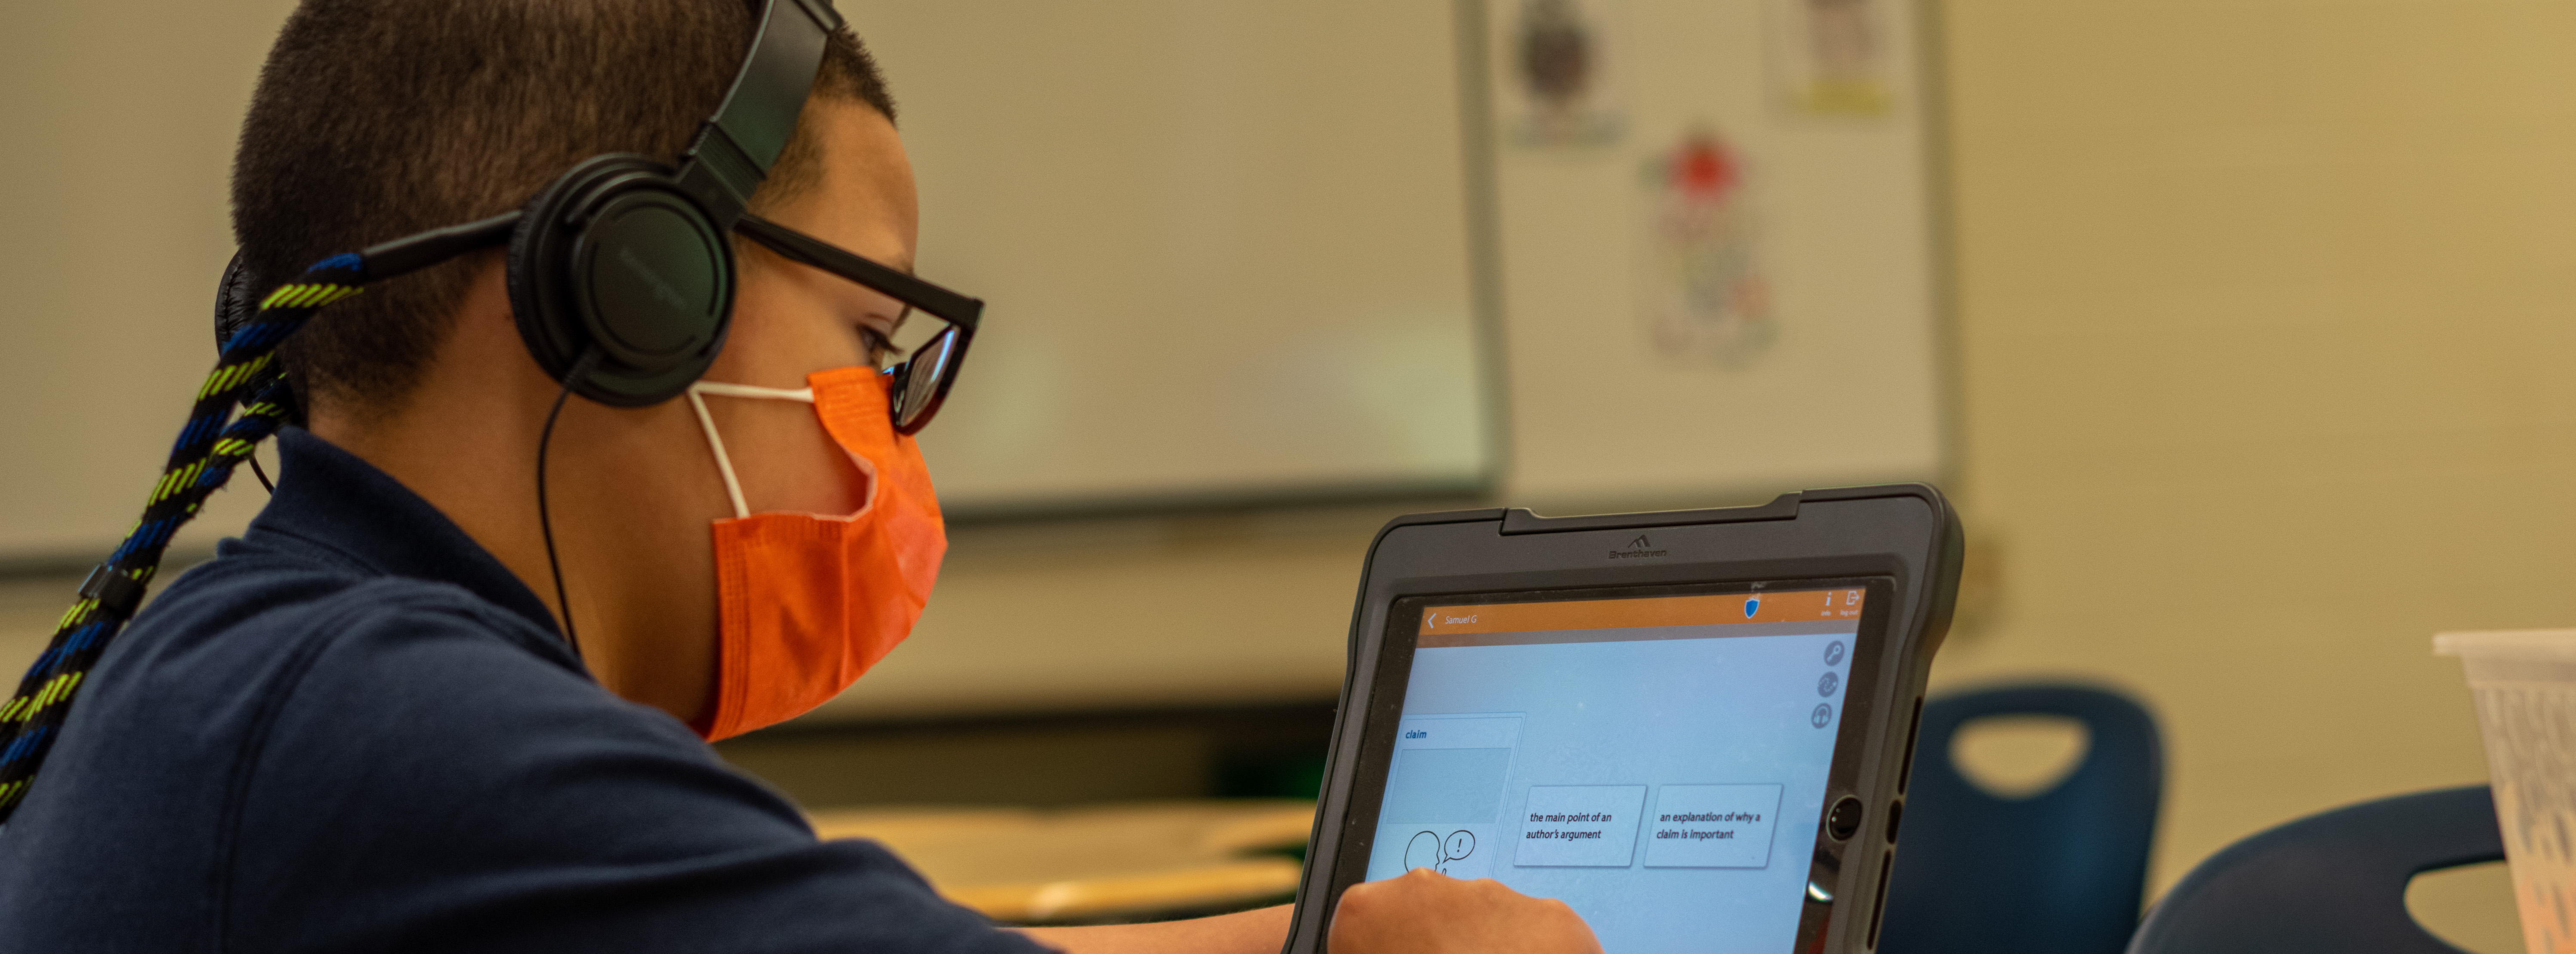 Student working on his iPad with an orange face mask on 